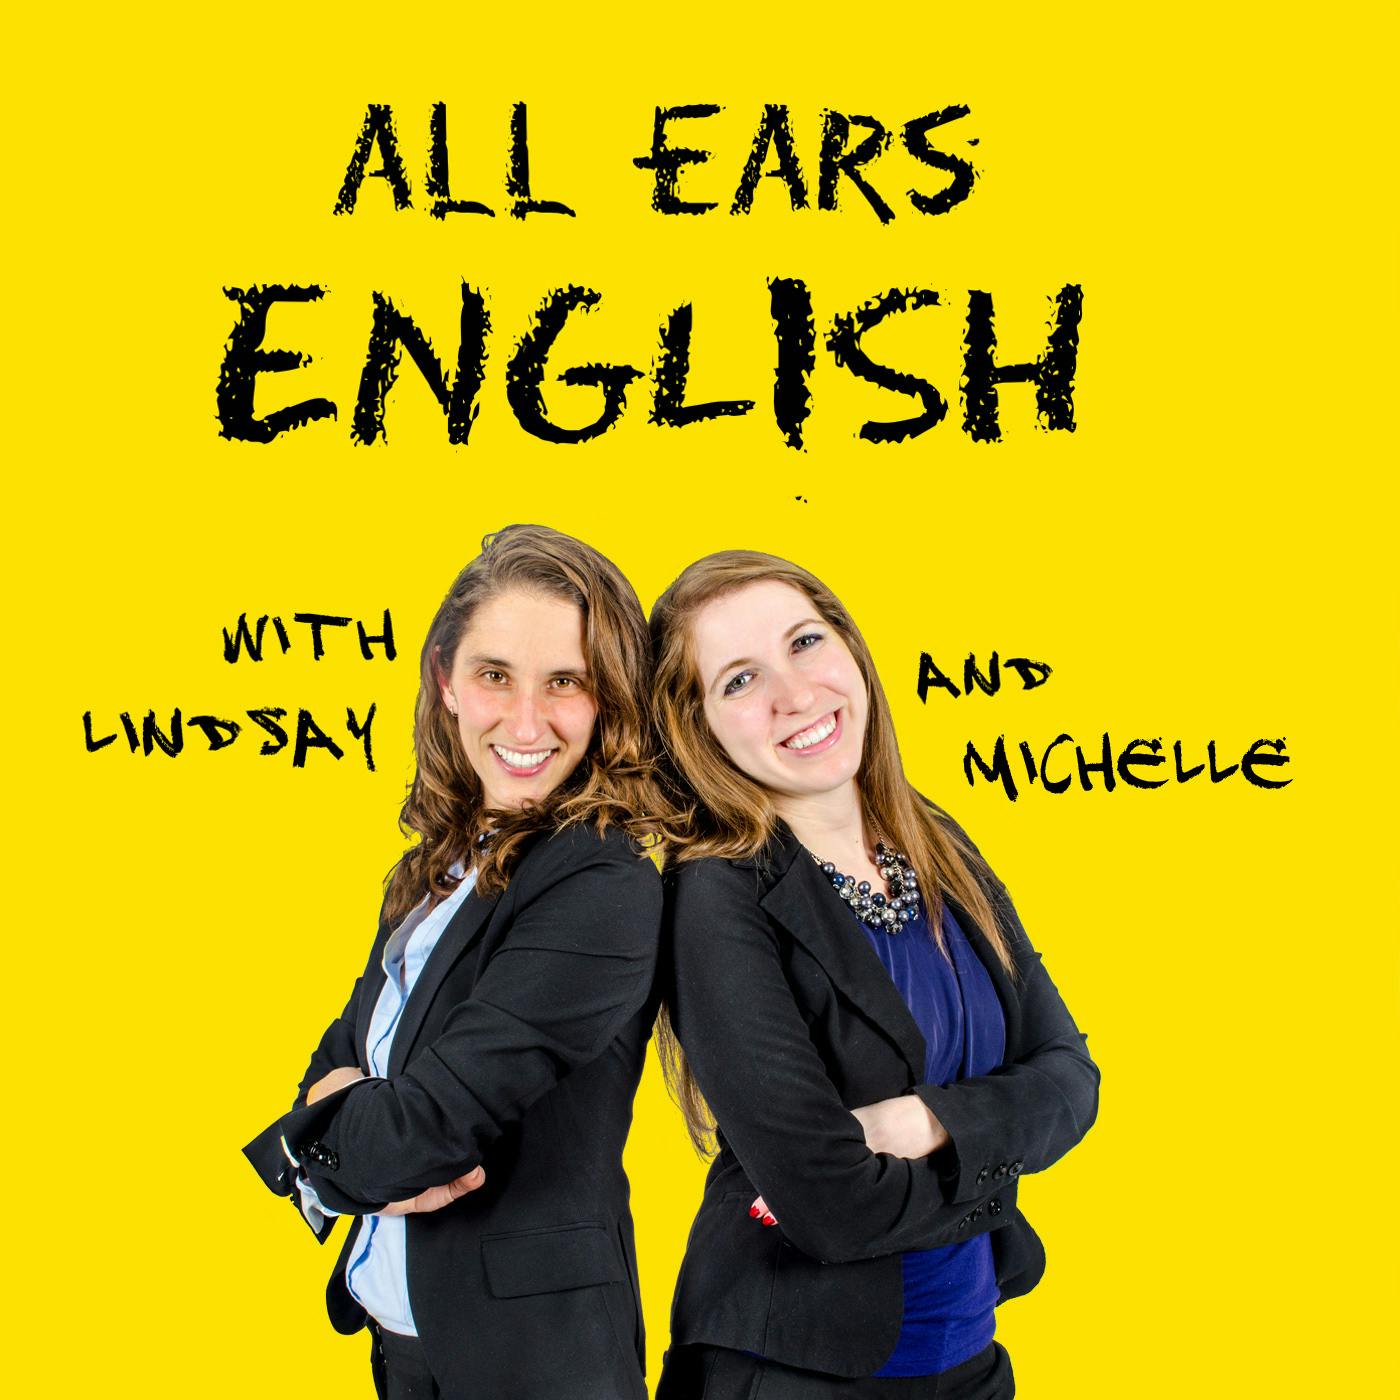 AEE 1209: What a Steal! How to Say You Got a Bargain in English